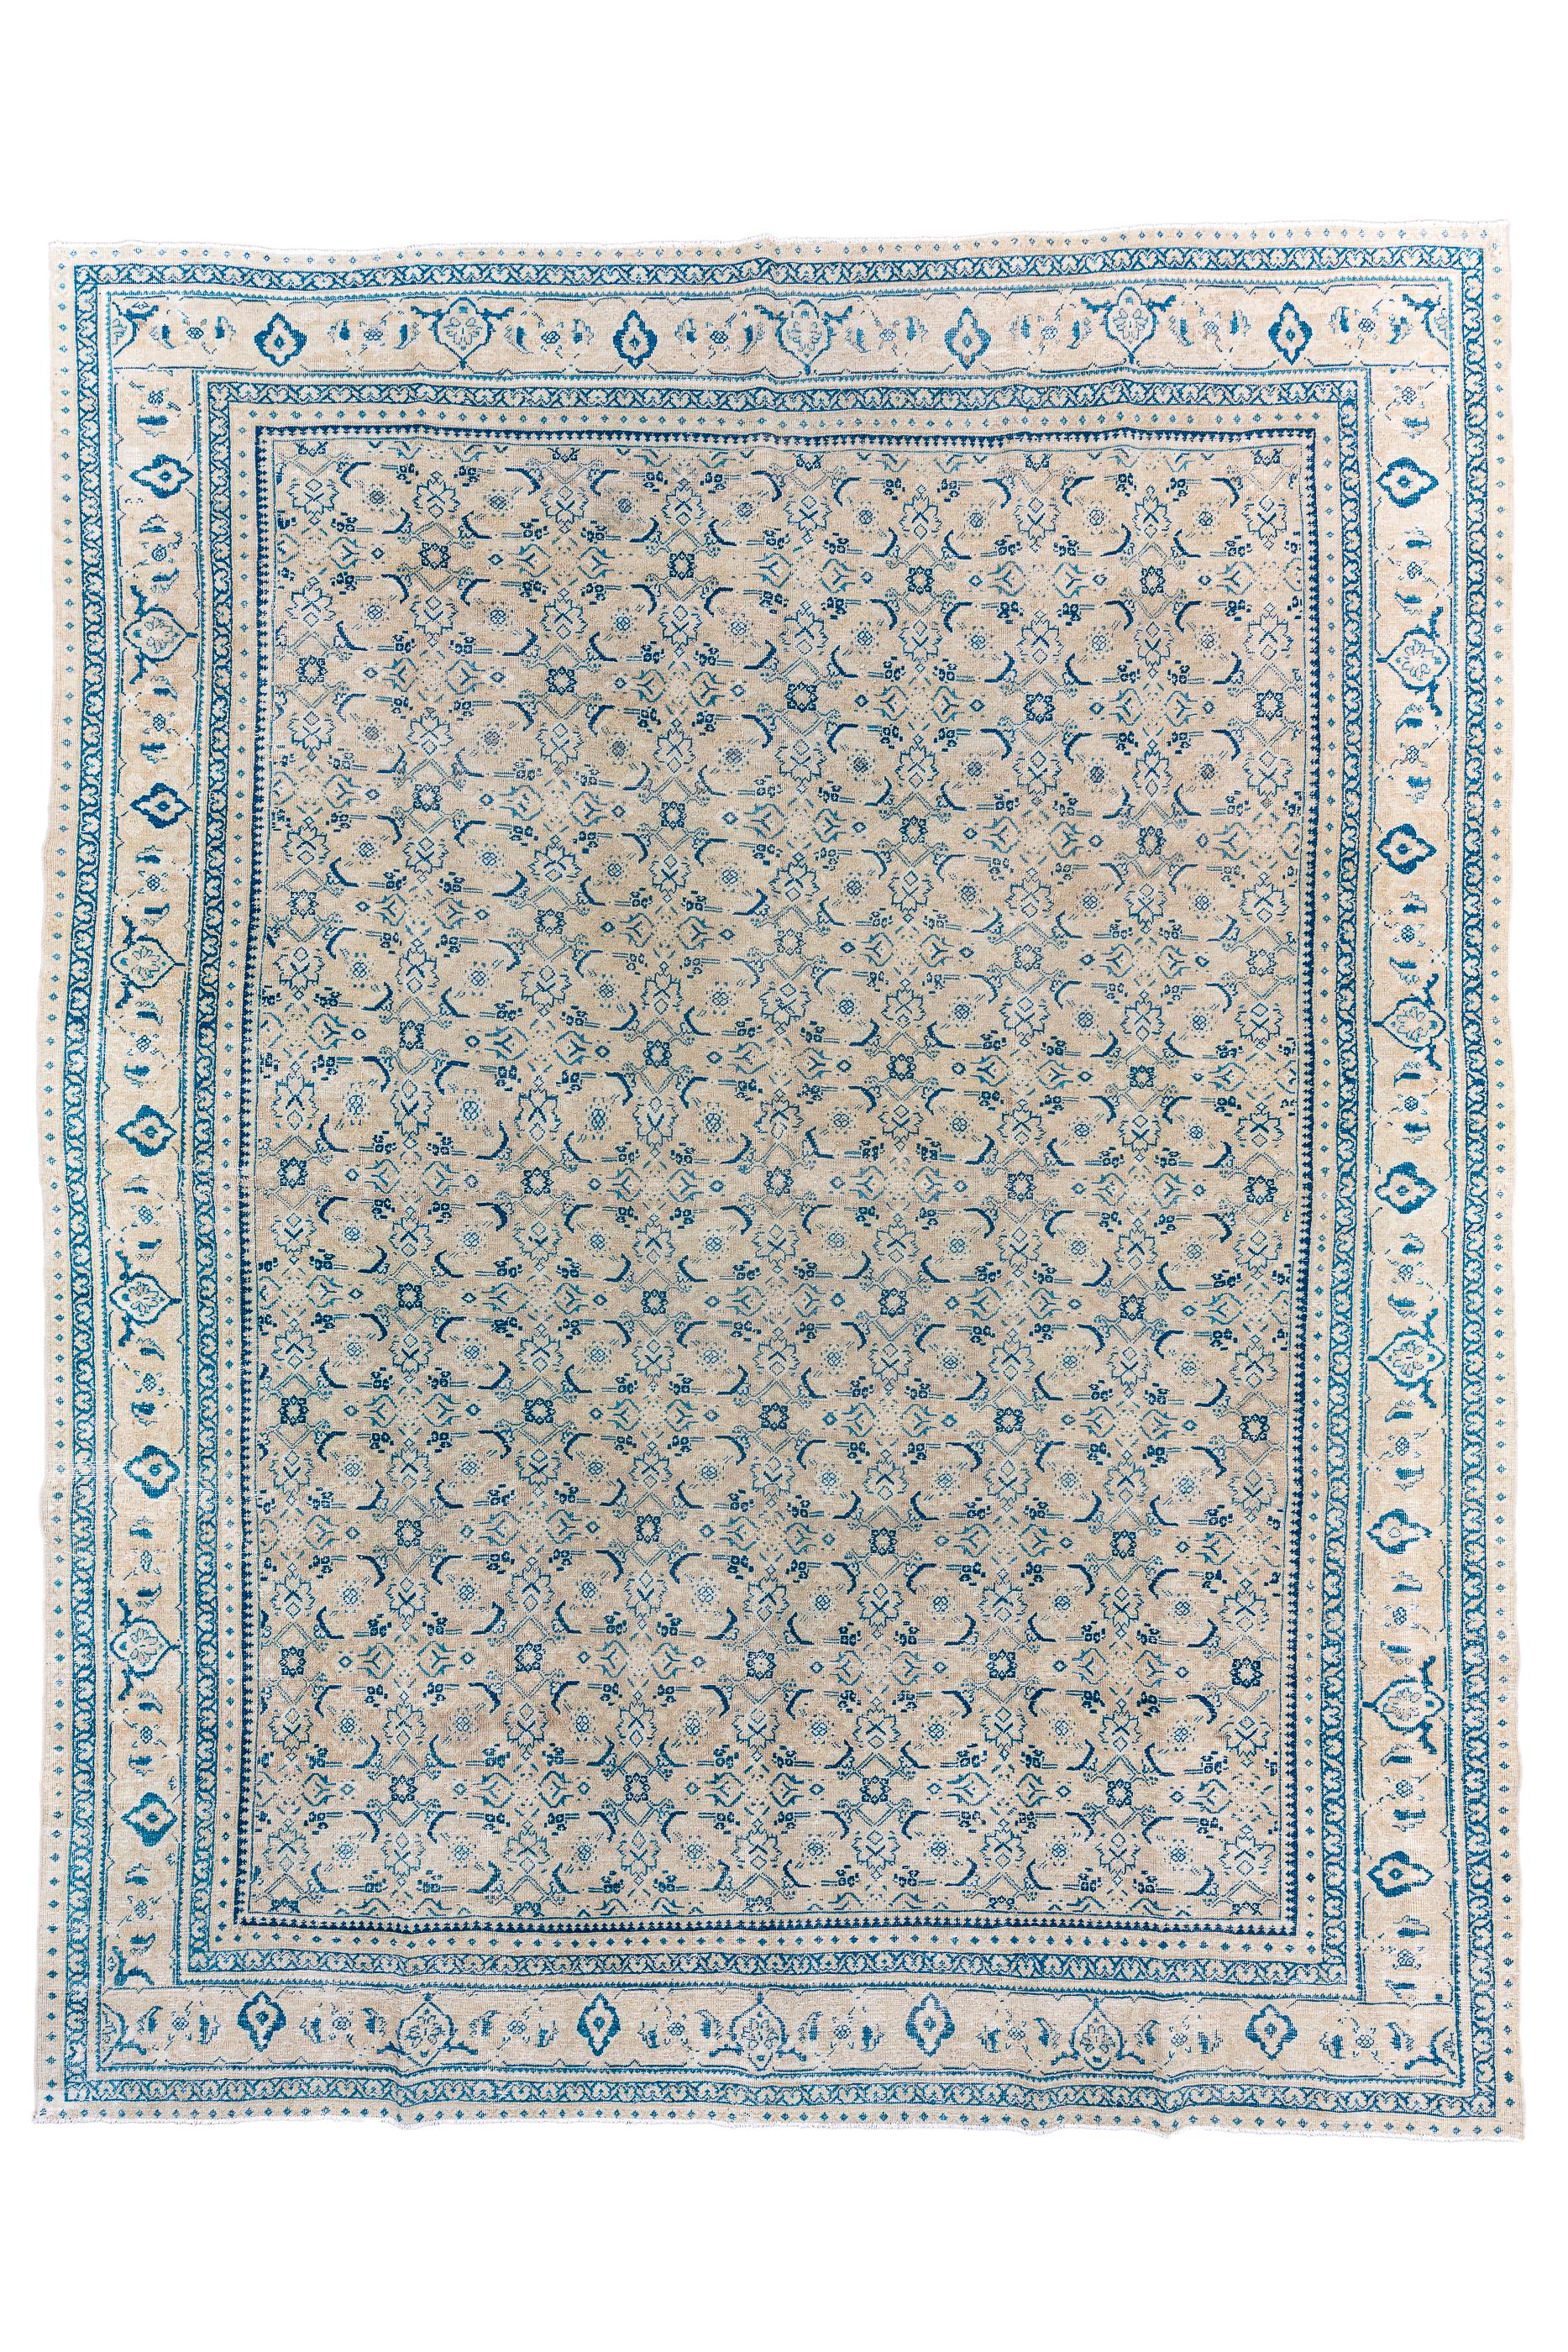 Mahal weavers just love the allover Herati design and here it is rendered in particularly small scale on  a light ground, with prominent paired sickle leaves . The straw strip style border shows simple turtle palmettes. The pattern is particularly